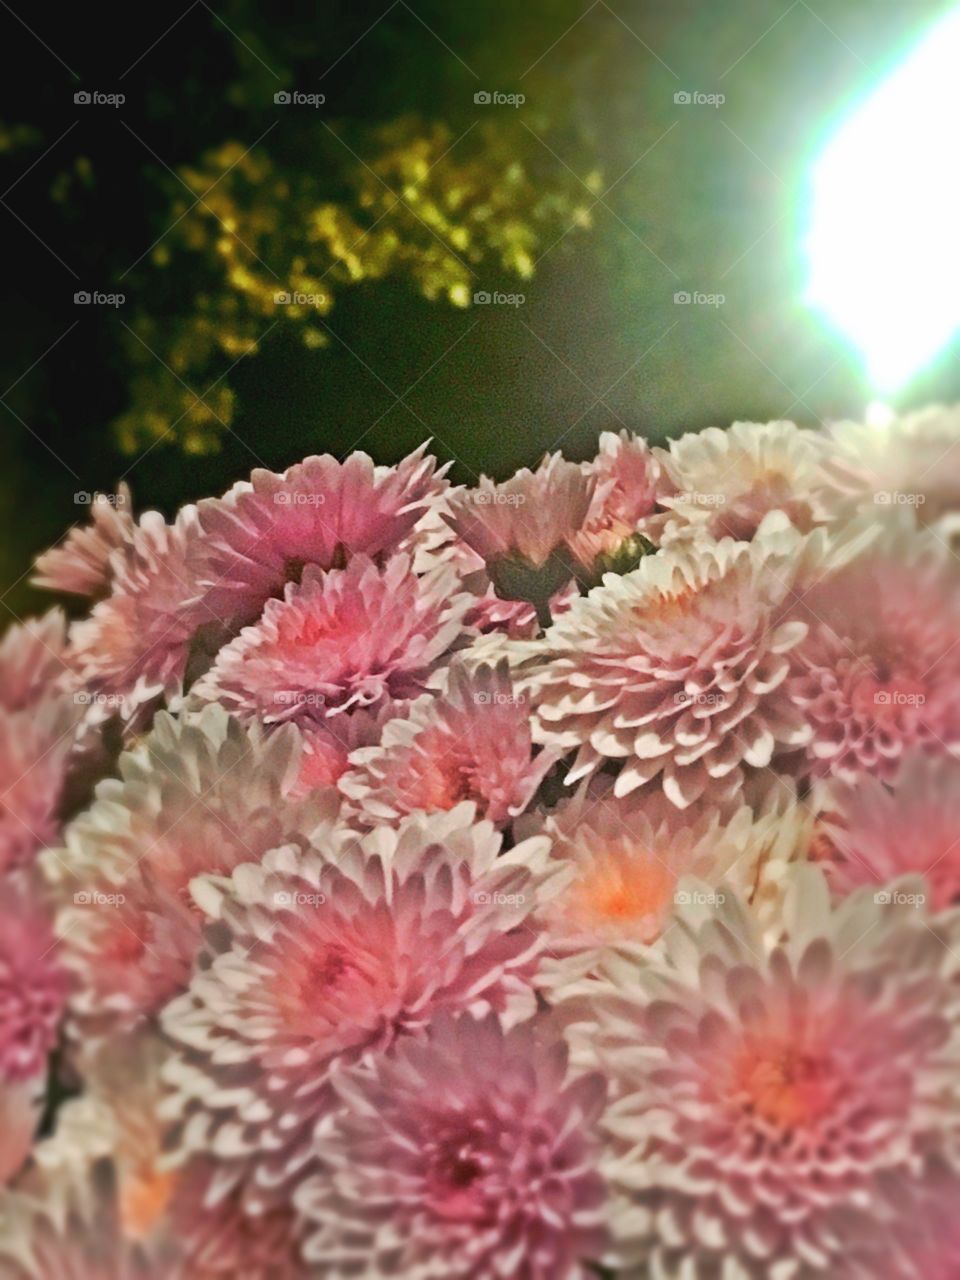 A close up of pink flowers at night, illuminated by a street light 